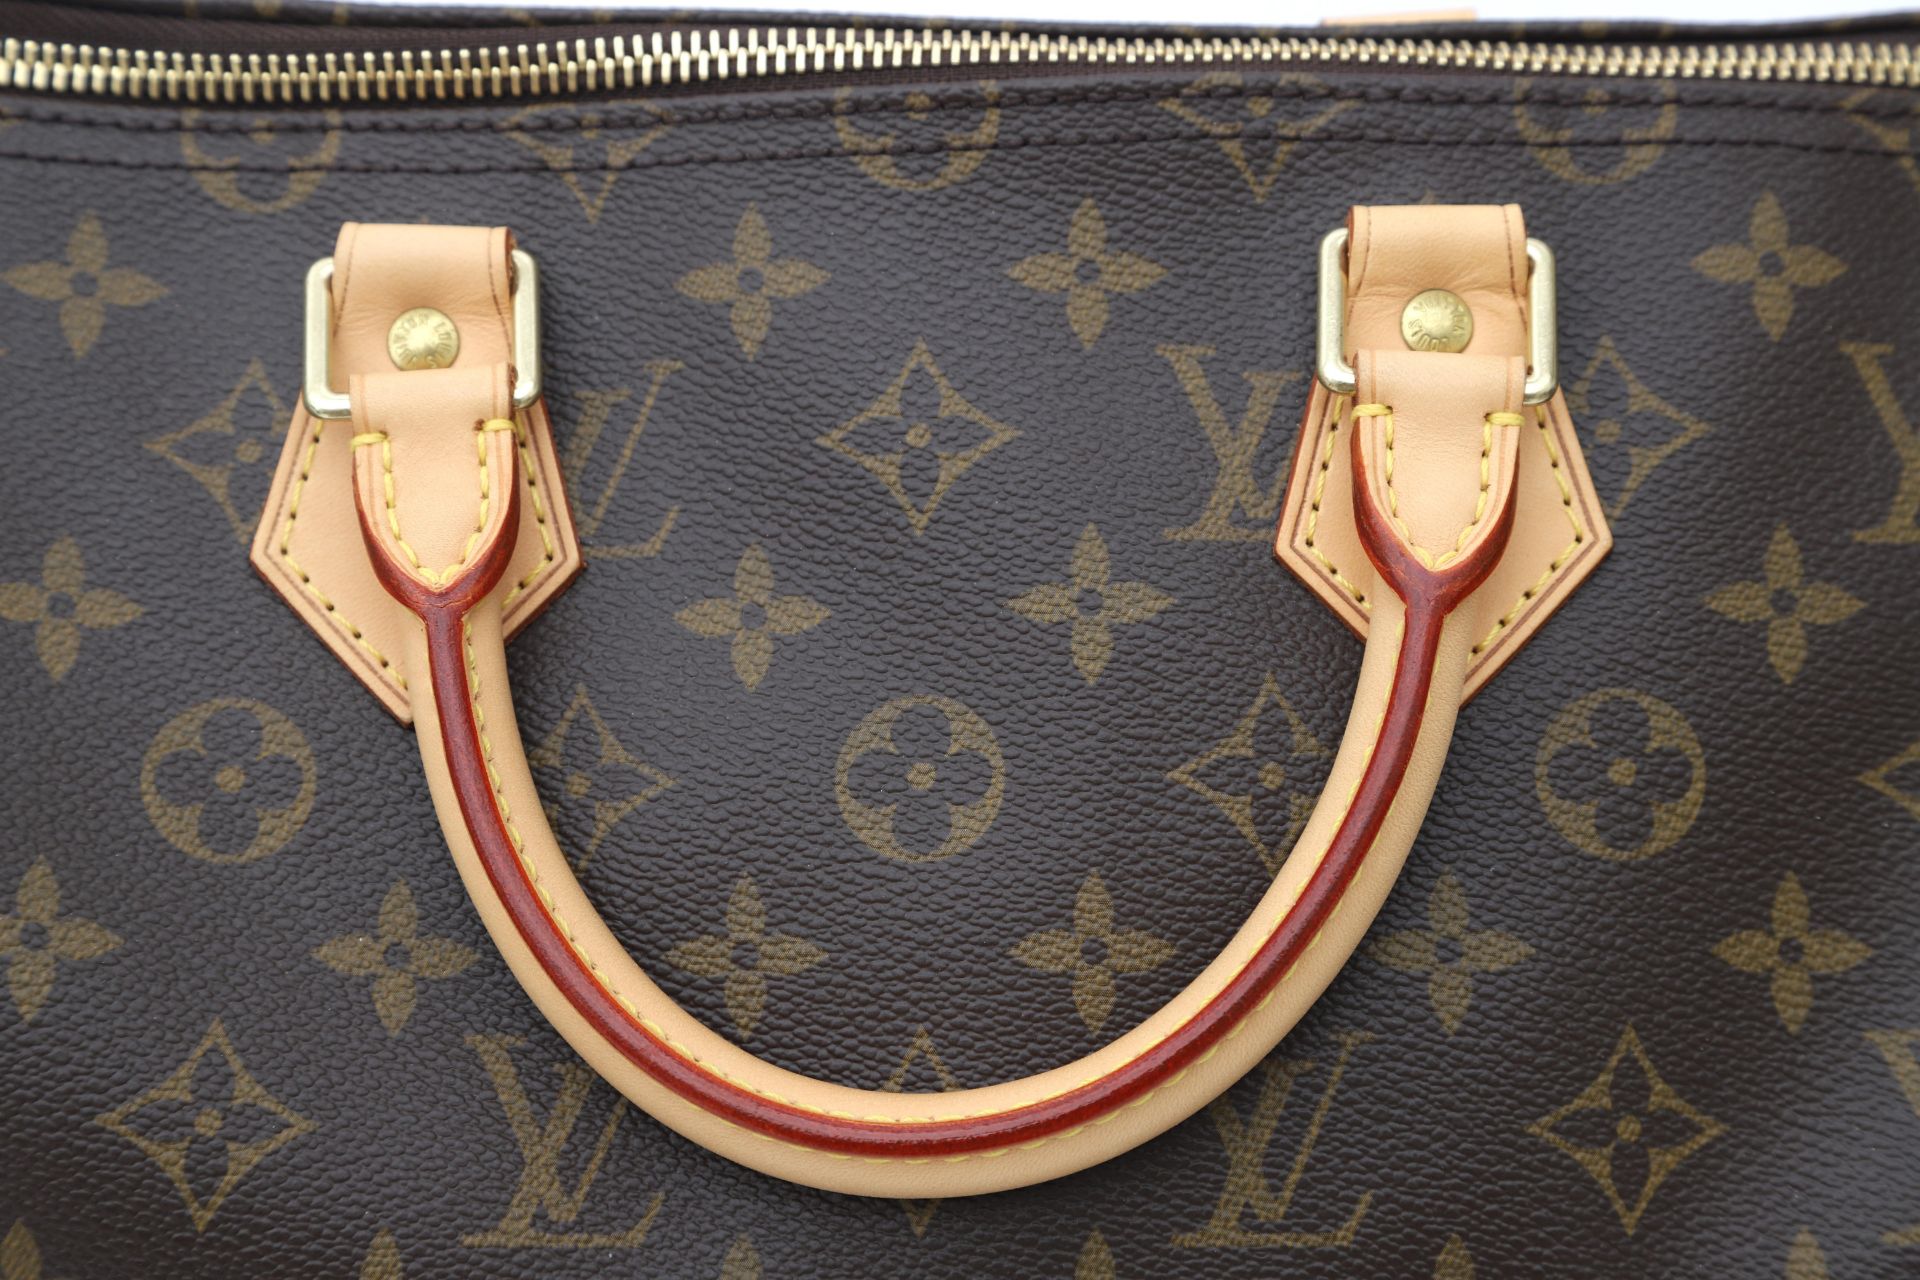 Vintage bag by Louis Vuitton model, Speedy 30 - Image 3 of 11